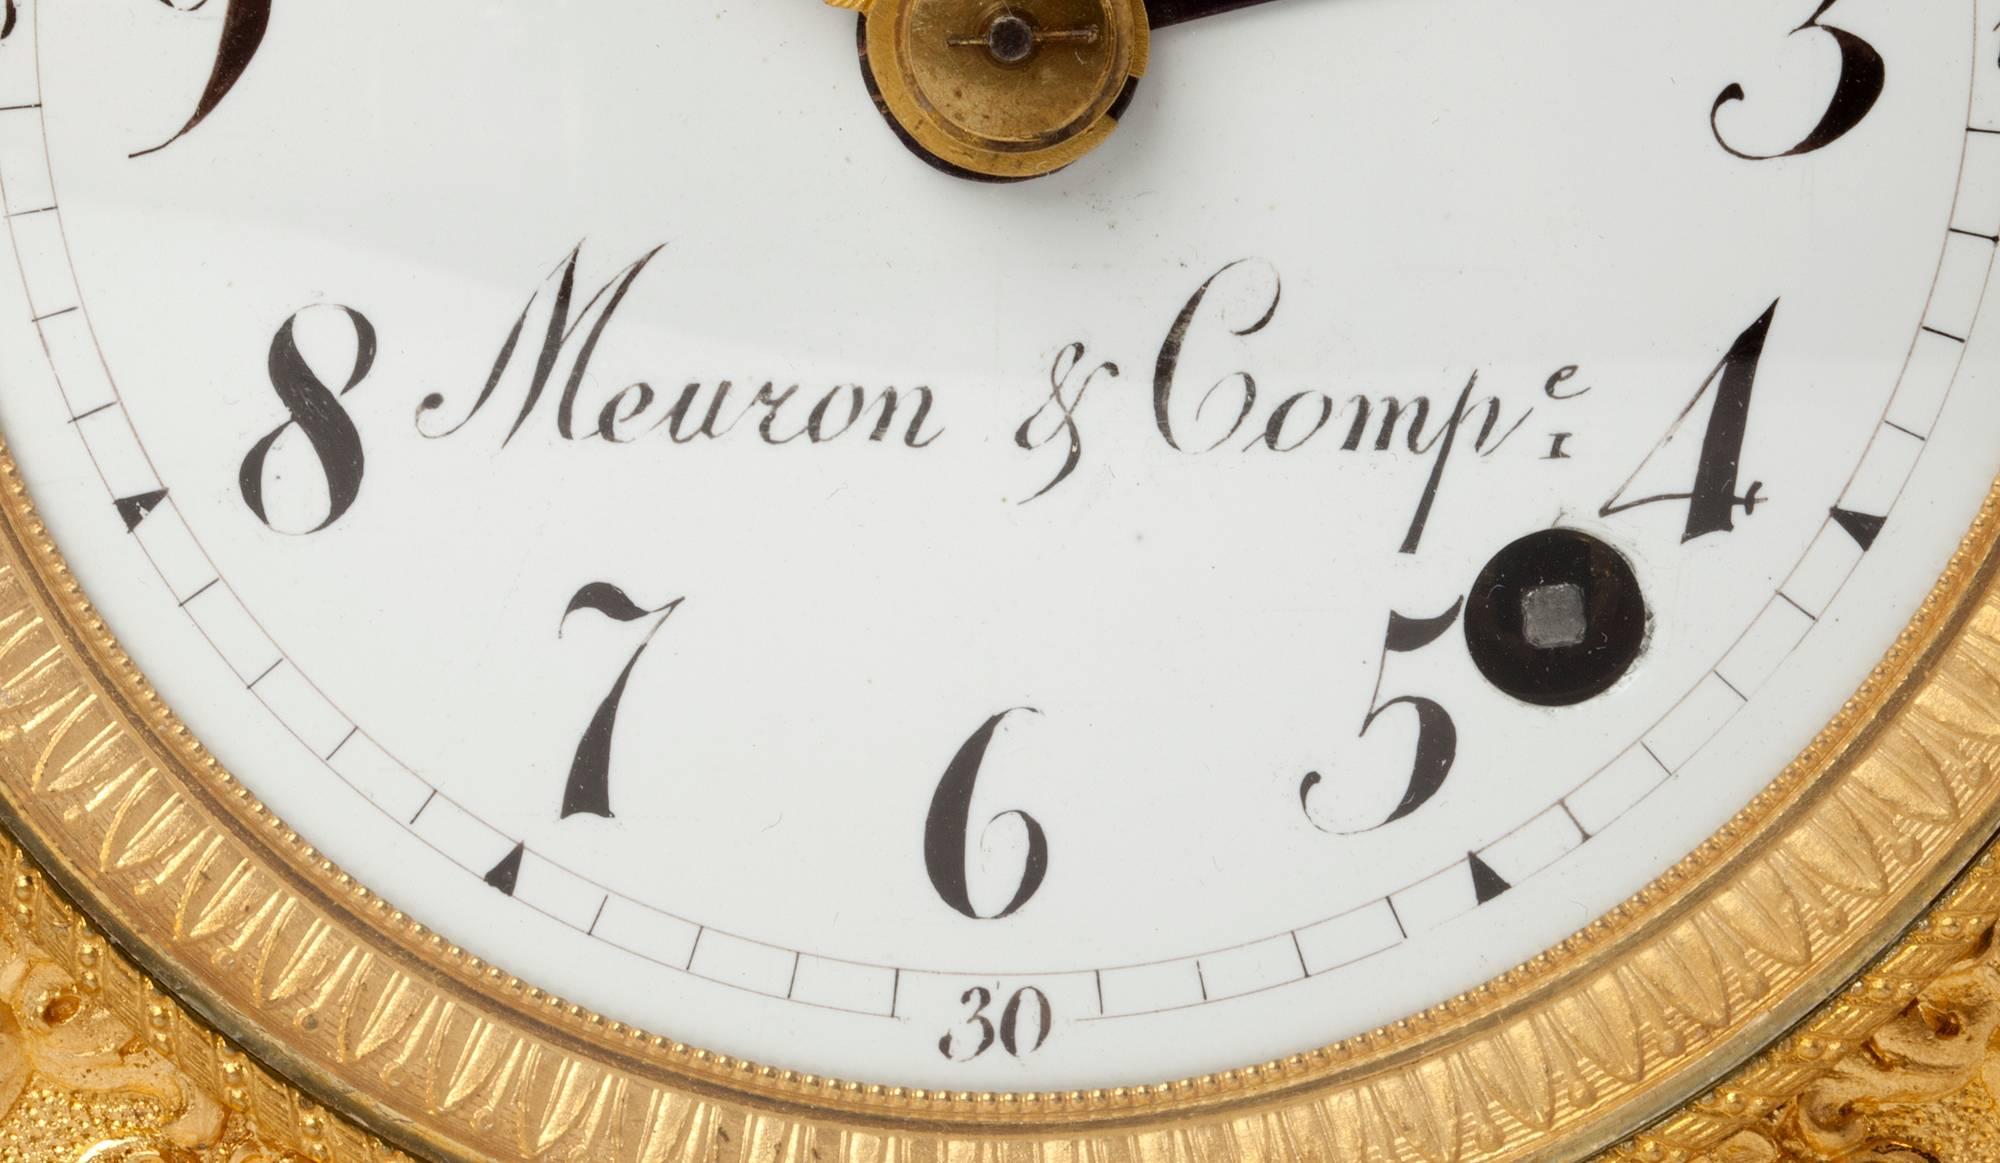 A Swiss ormolu 'pendule d'officier' with grande sonnerie, by Meuron & Compagnie, circa 1810.

9.7 cm enamel dial with Arabic numerals signed Meuron & Comp, fine pierced gilt hands and blued alarm pointer, two day movement with pull repeating